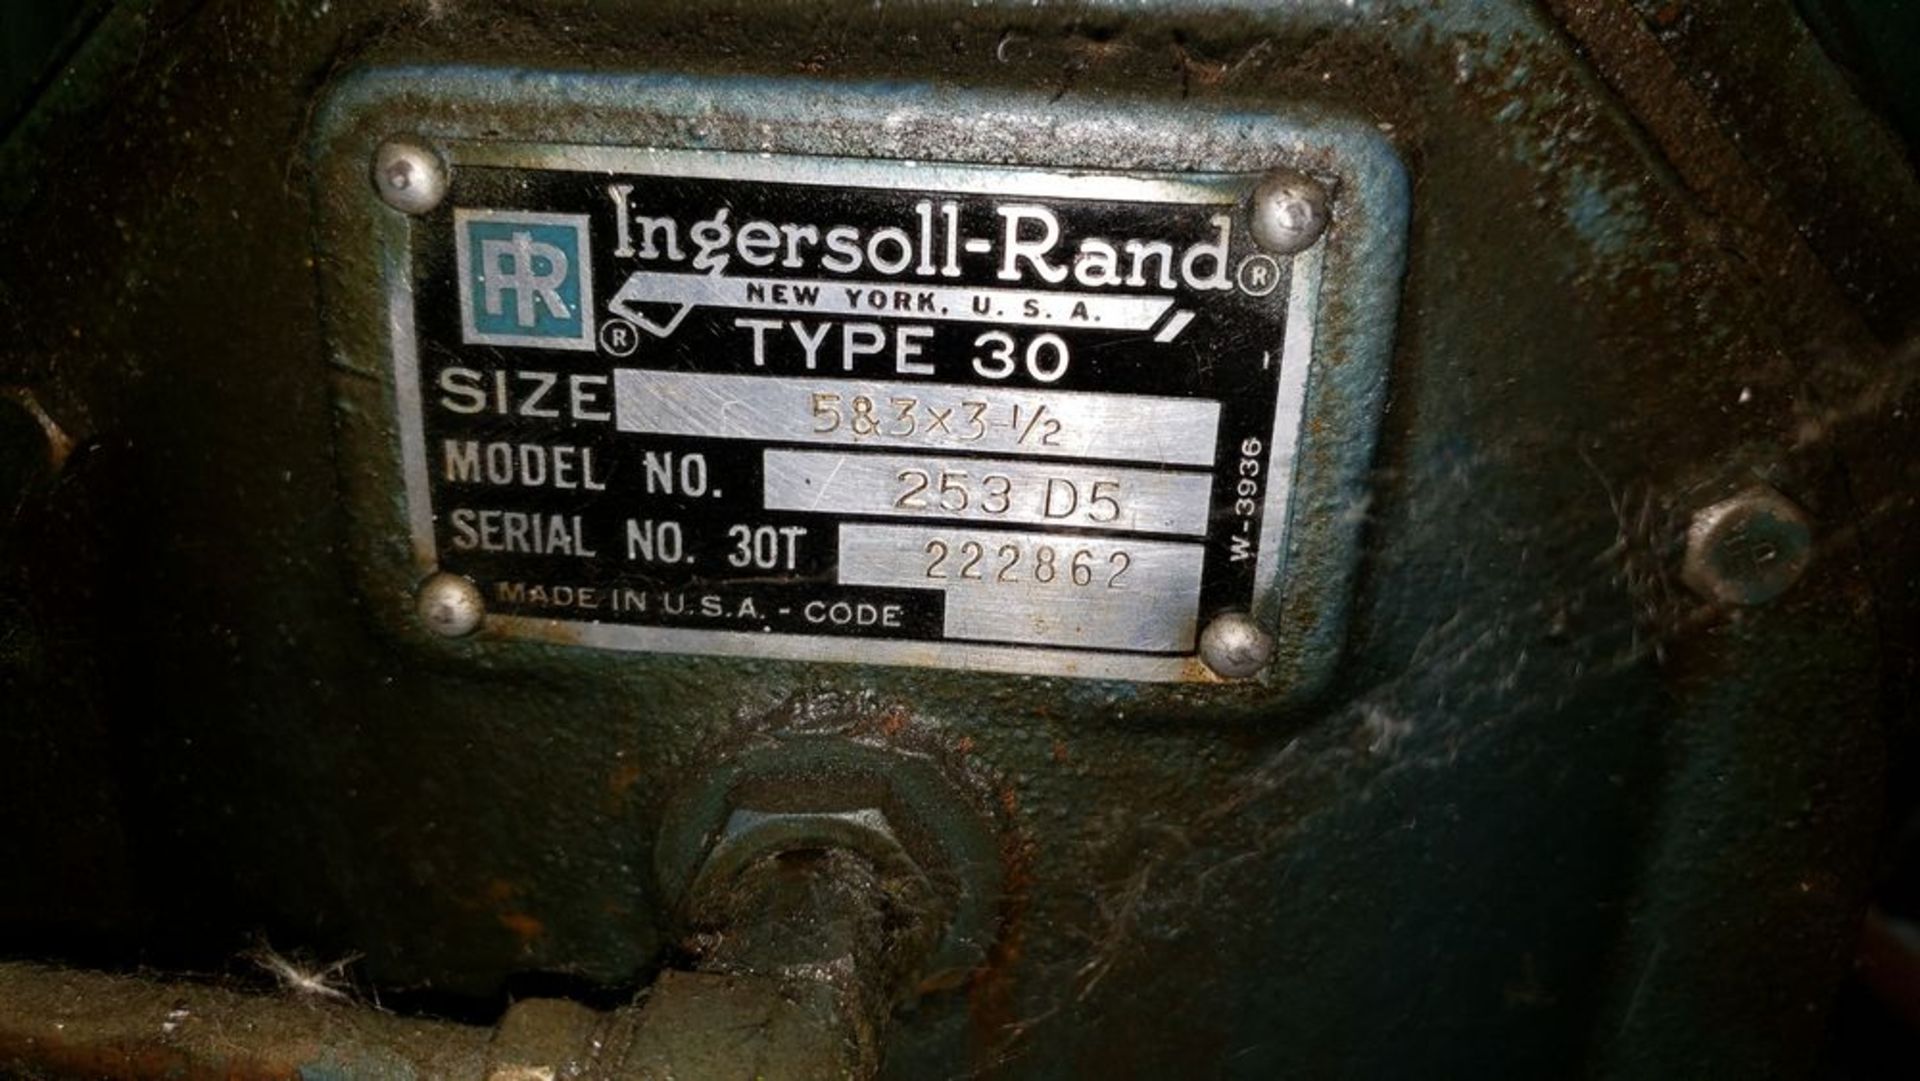 Ingersoll Rand Air Compressor - Image 2 of 2